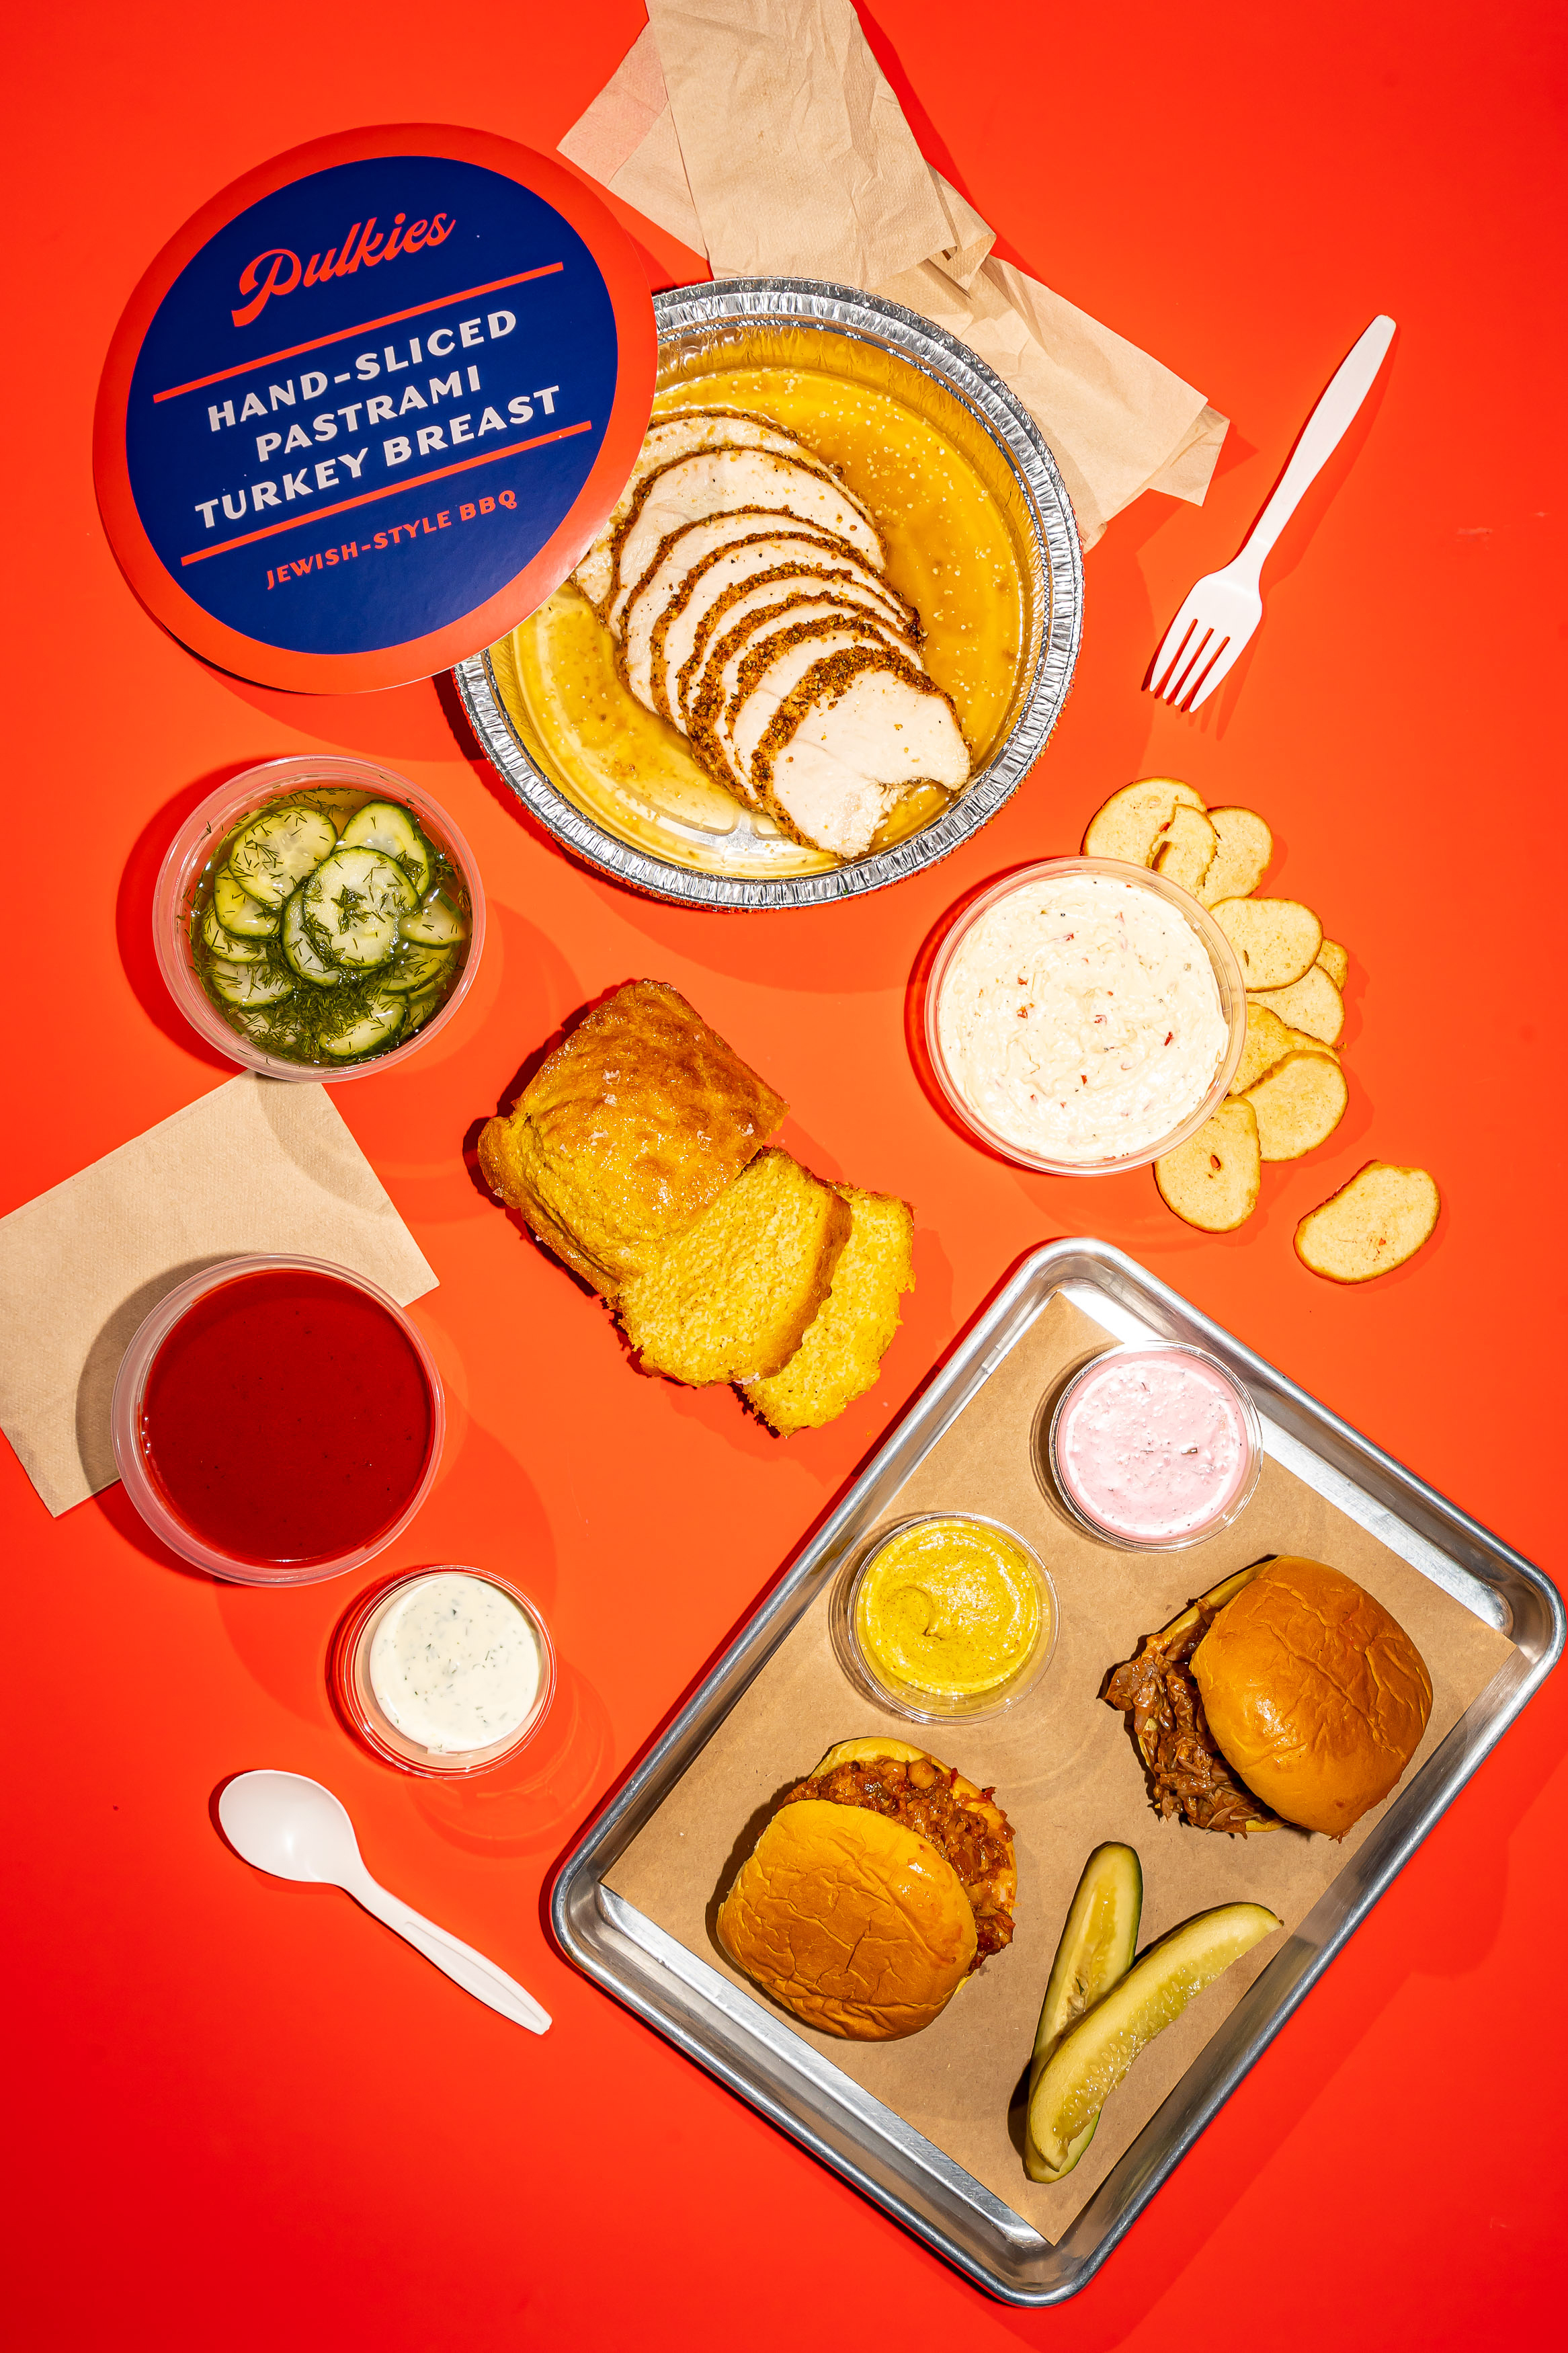 An overhead photograph of a spread of foods, including two pulled turkey sandwiches, plastic to-go containers of dips, sliced breads, pickles, and plastic utensils